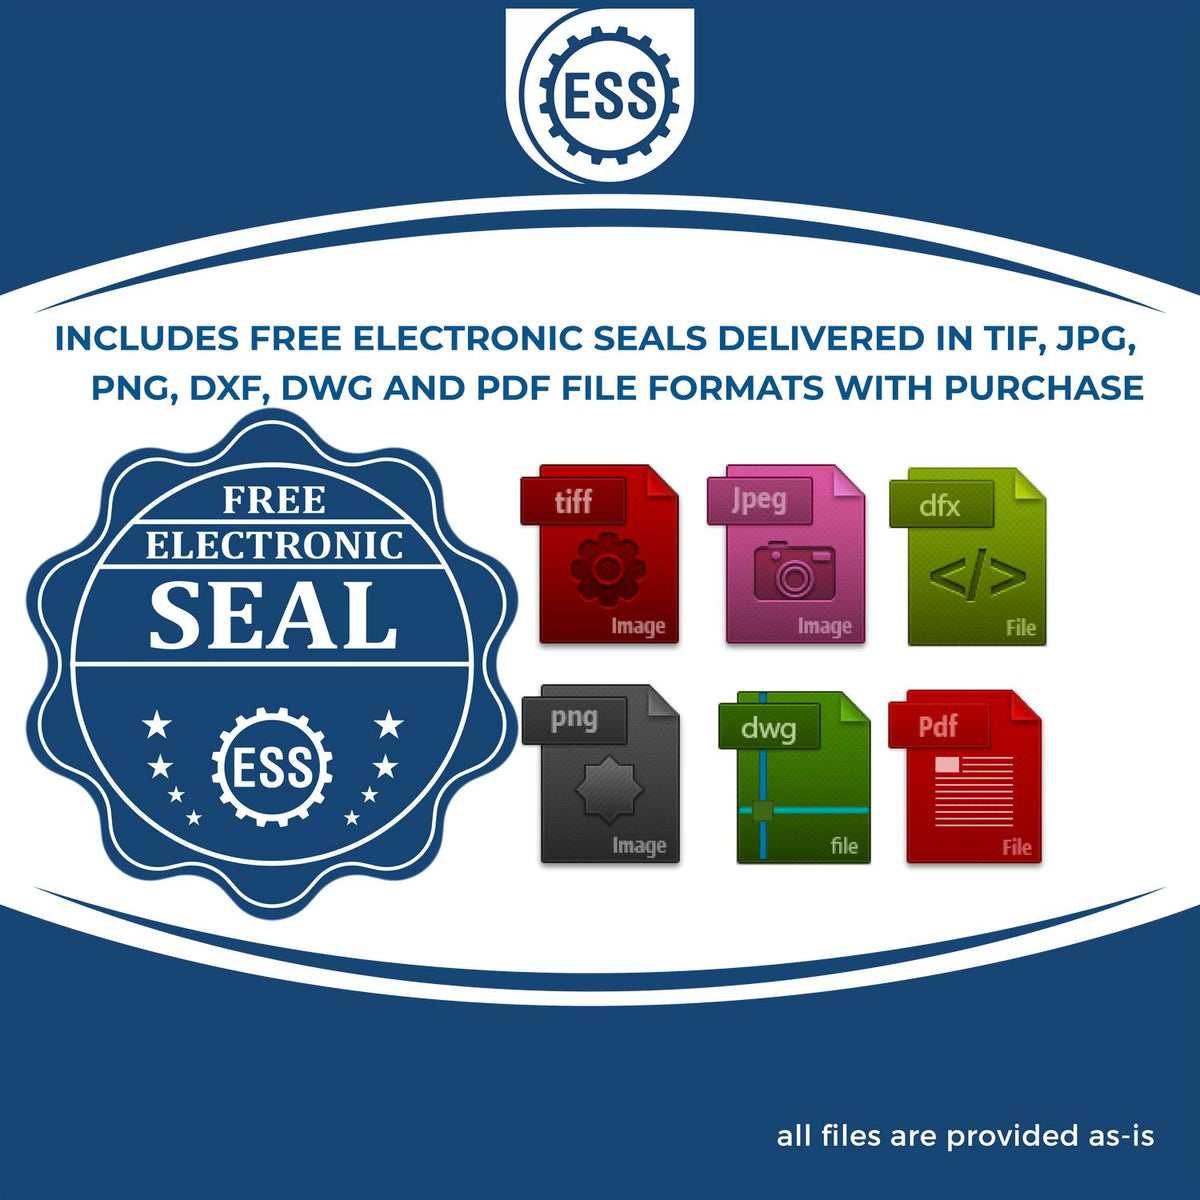 An infographic for the free electronic seal for the Heavy Duty Cast Iron Georgia Architect Embosser illustrating the different file type icons such as DXF, DWG, TIF, JPG and PNG.